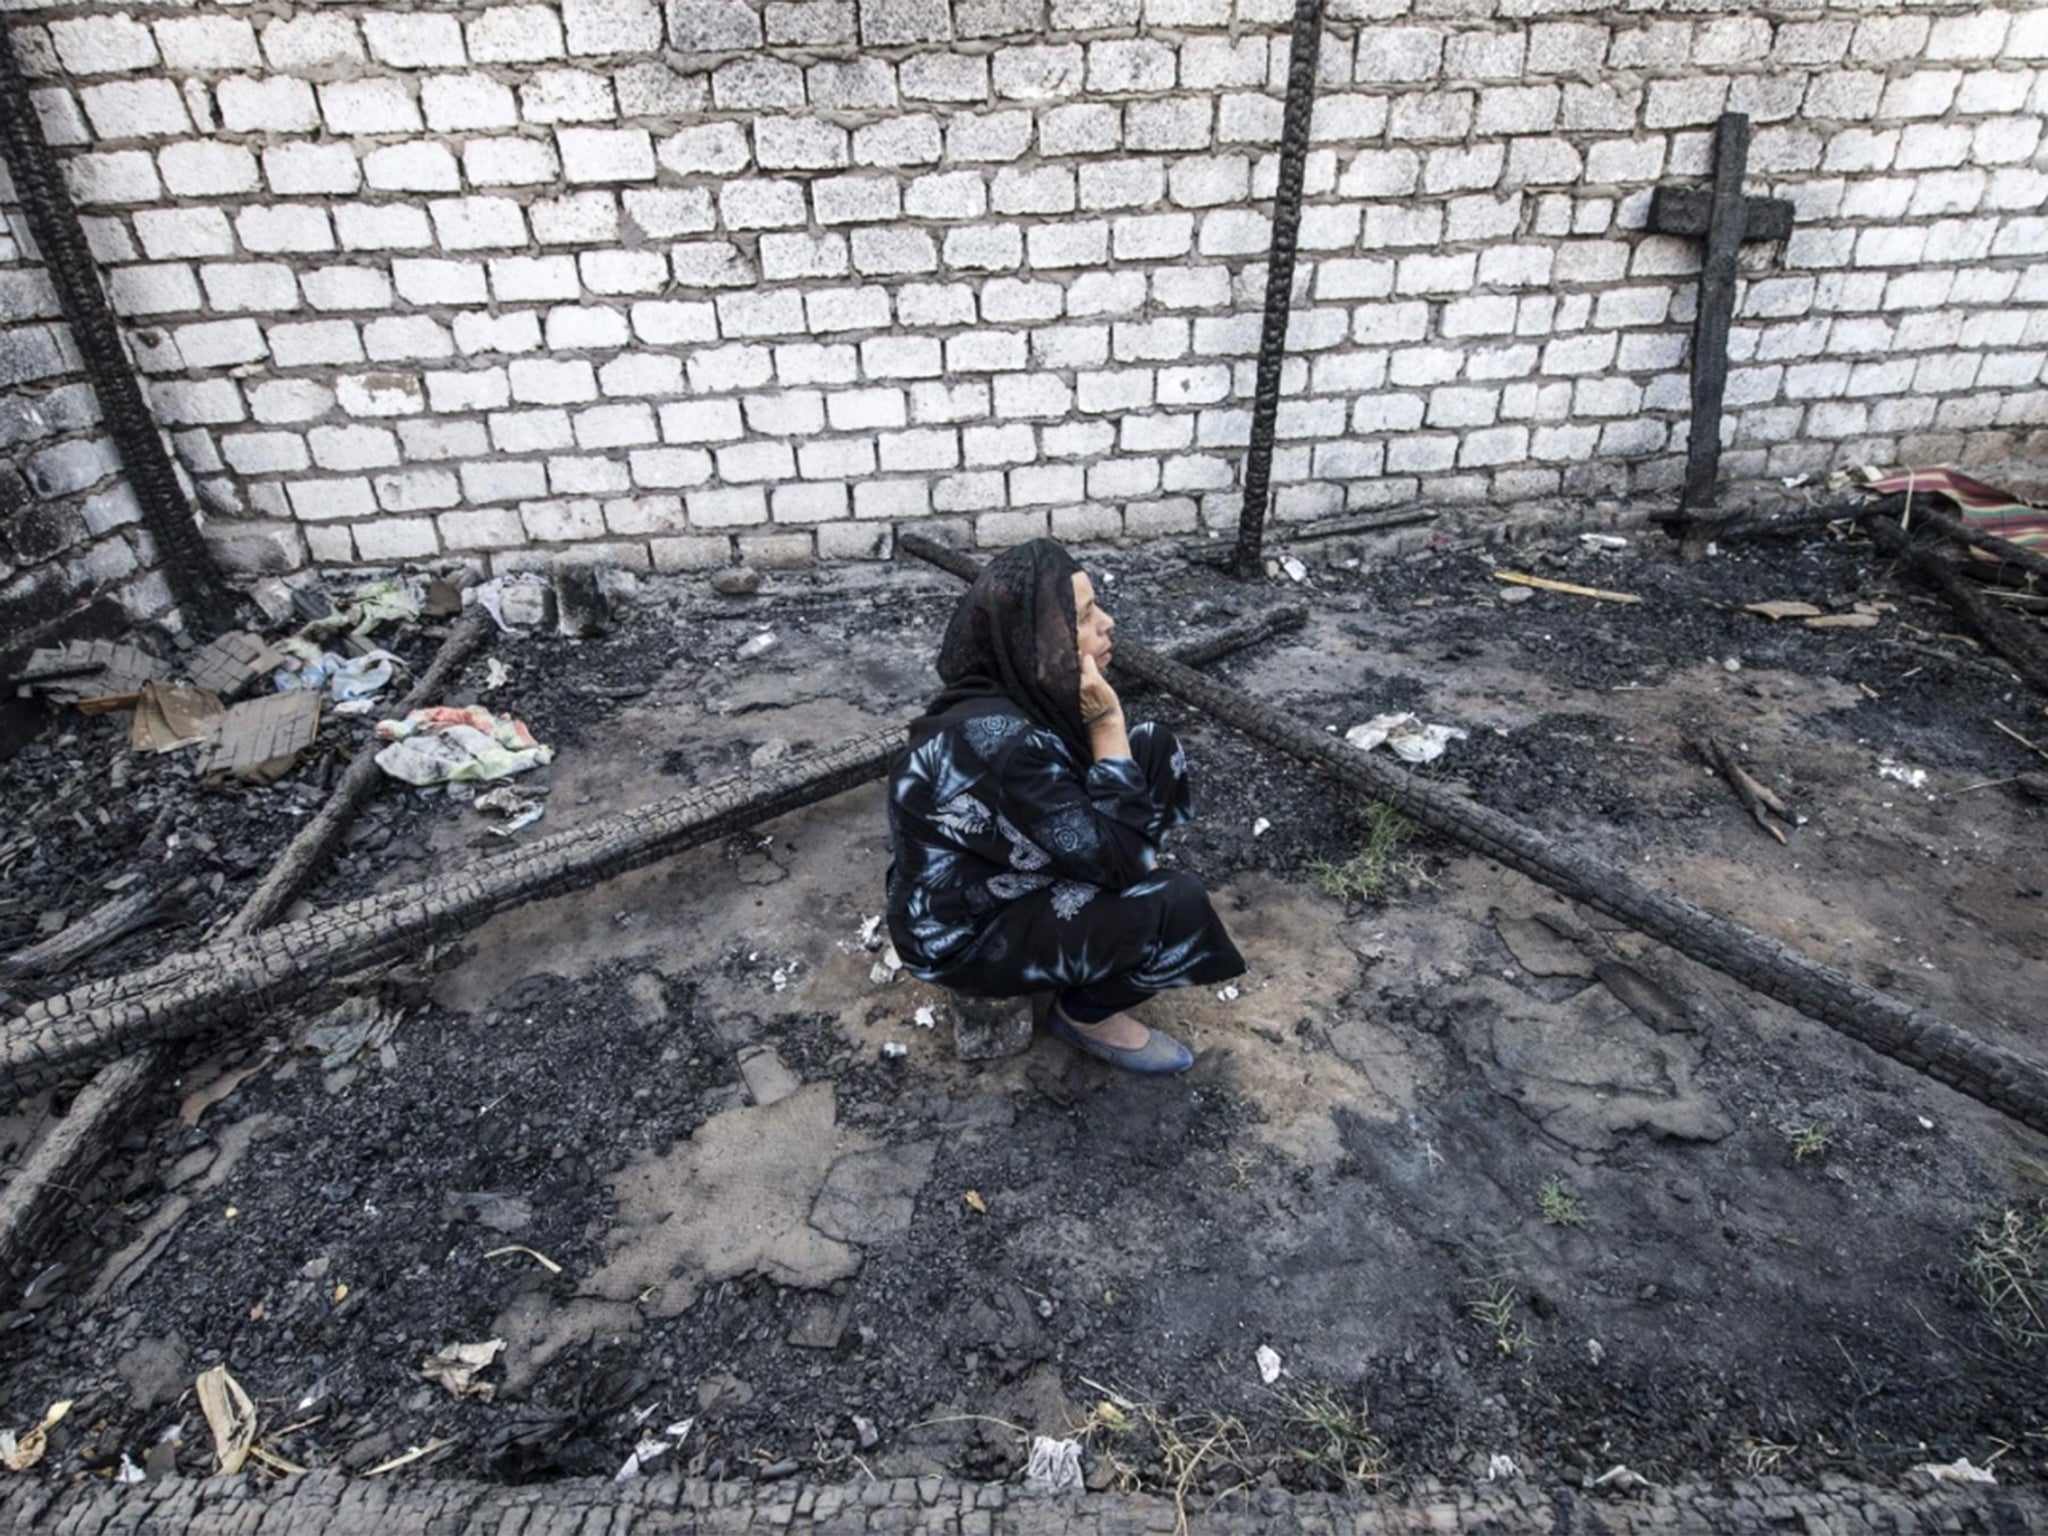 An Egyptian Coptic Christian woman sits in the rubble of a makeshift chapel that was torched a few months ago during clashes in the village of Ismailia, about 200 miles south of Cairo